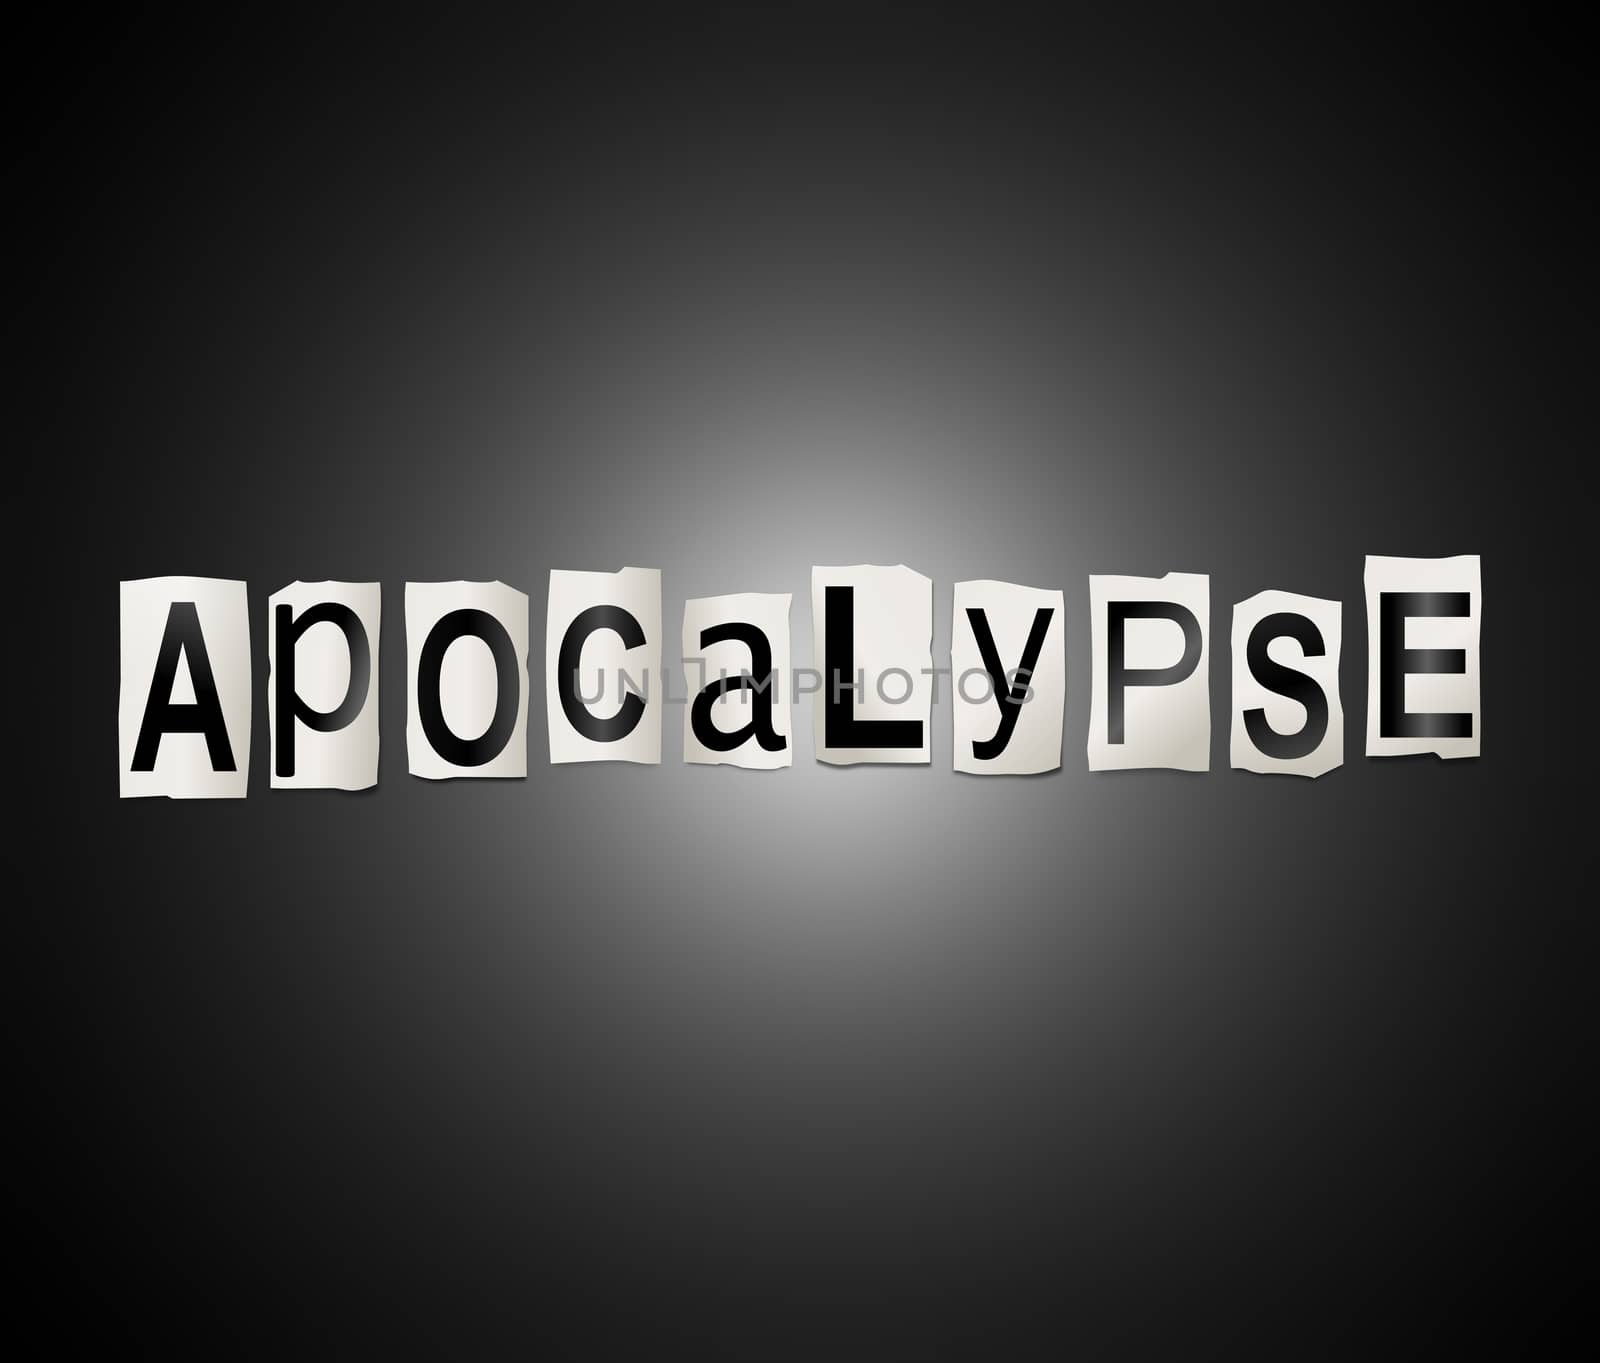 Apocalypse word concept. by 72soul